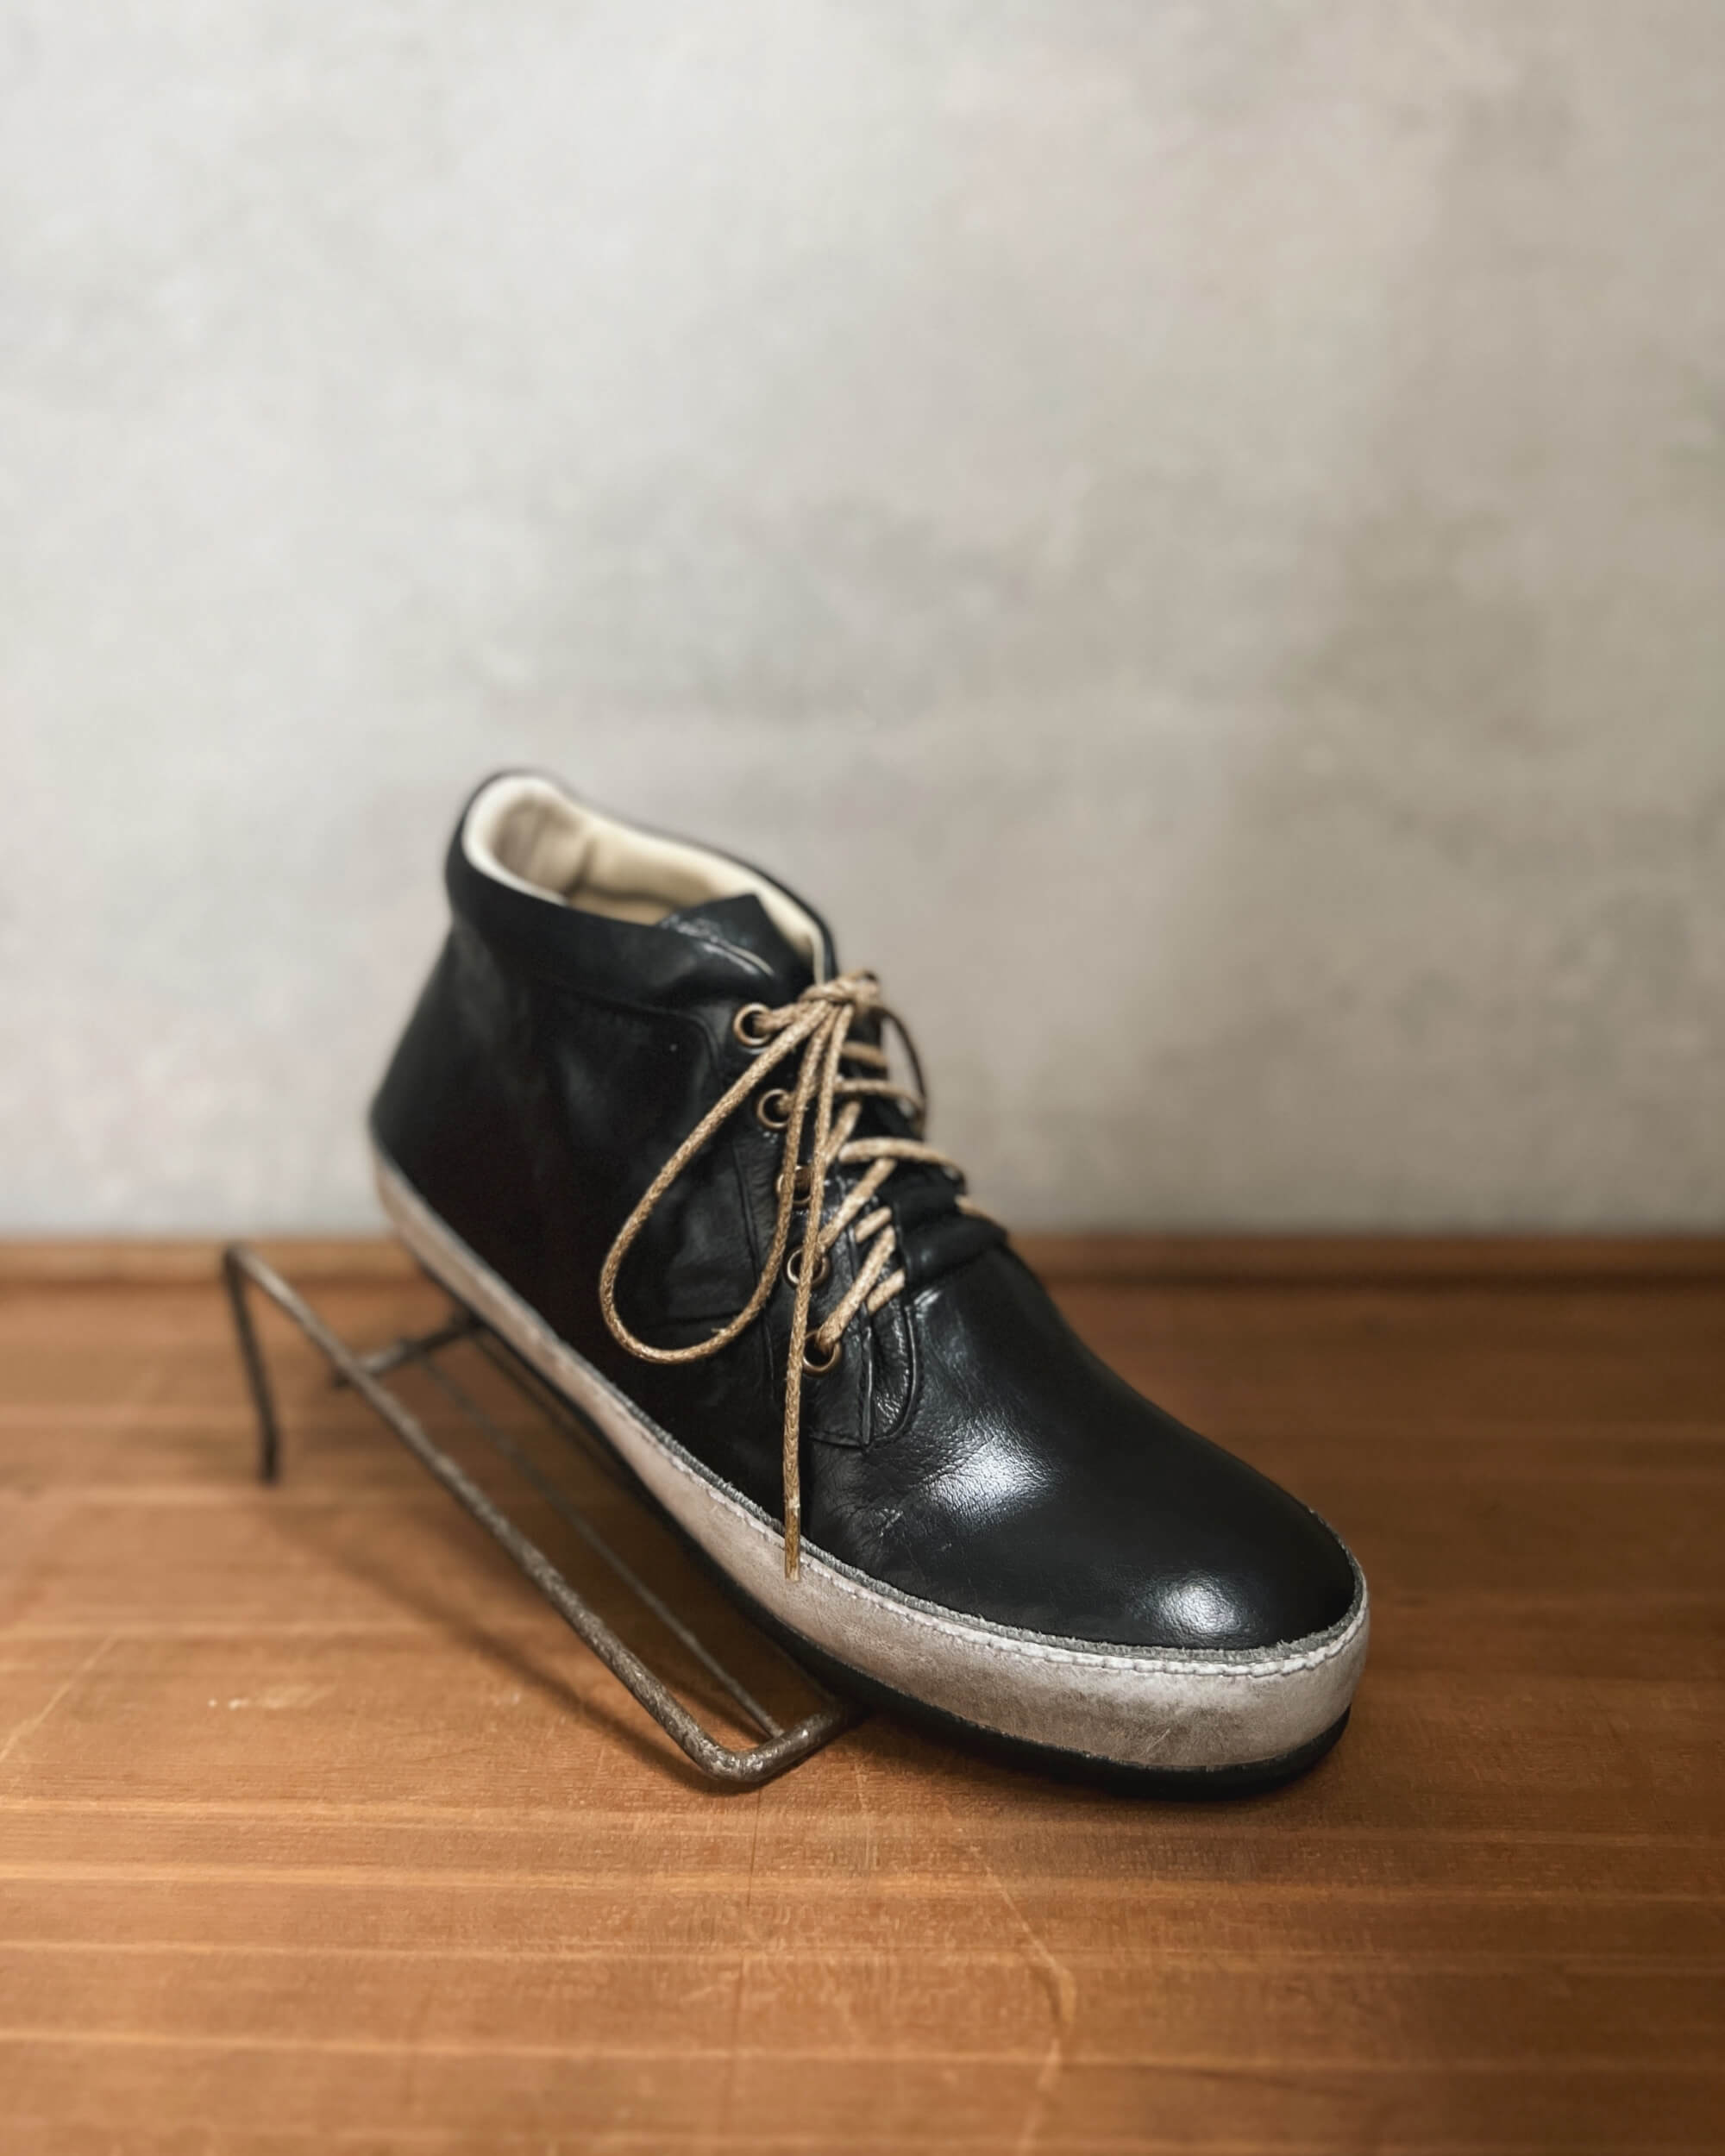 italian leather shoes by victoria varrasso